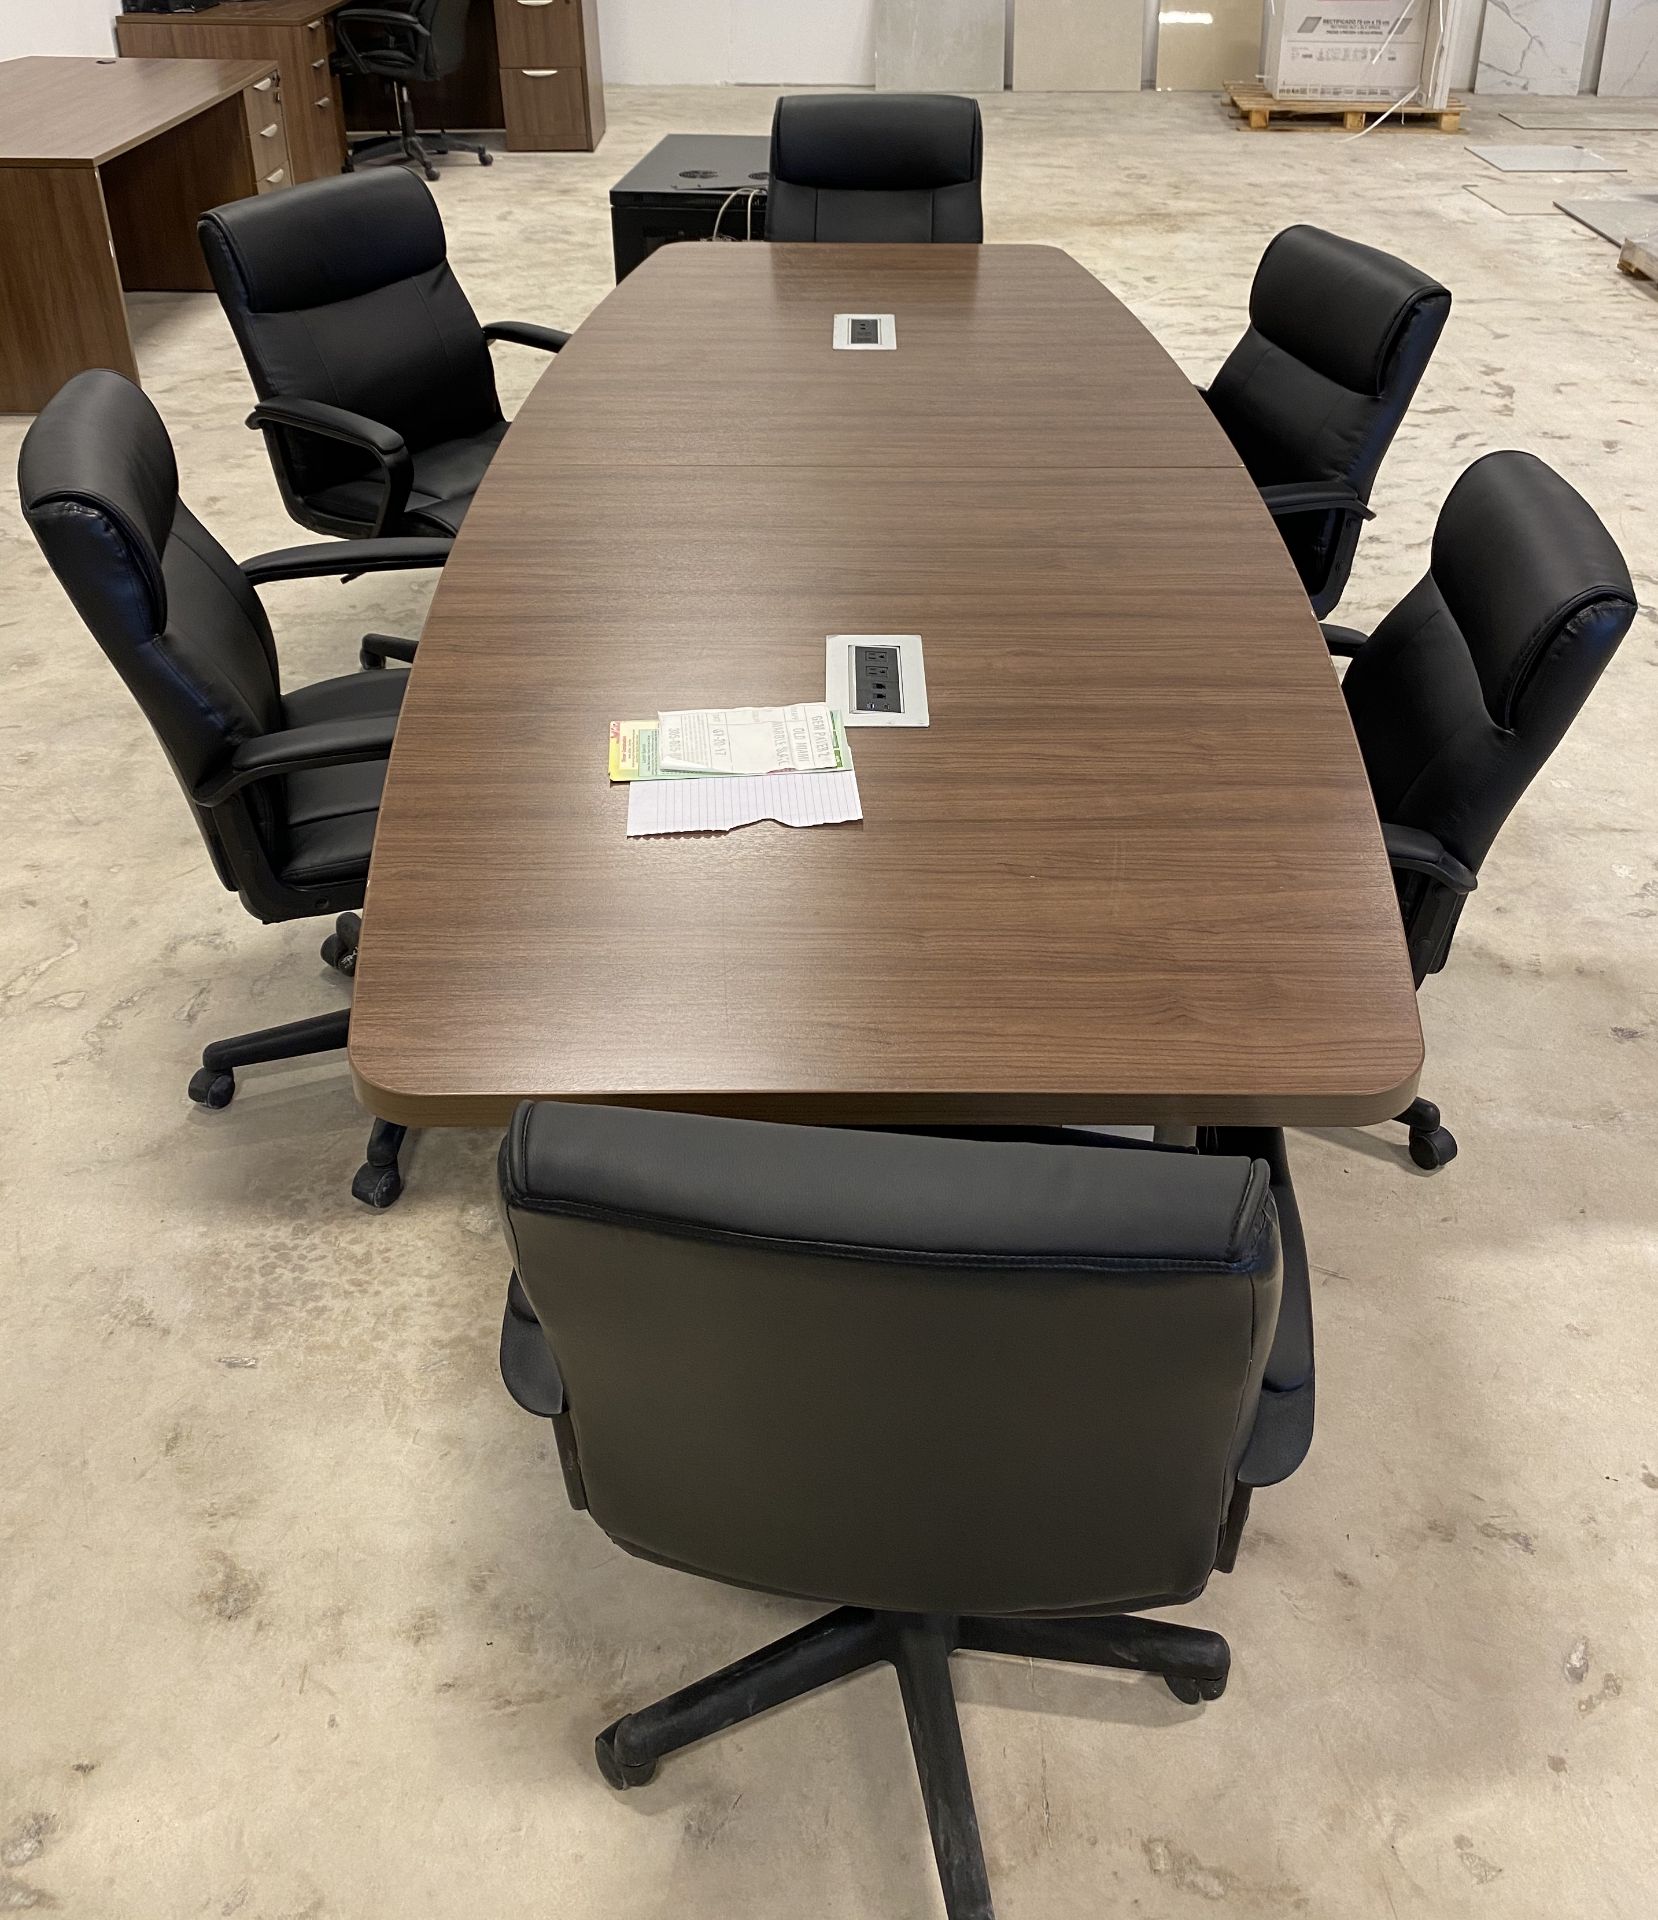 LARGE CONFERENCE TABLE WITH CHAIRS